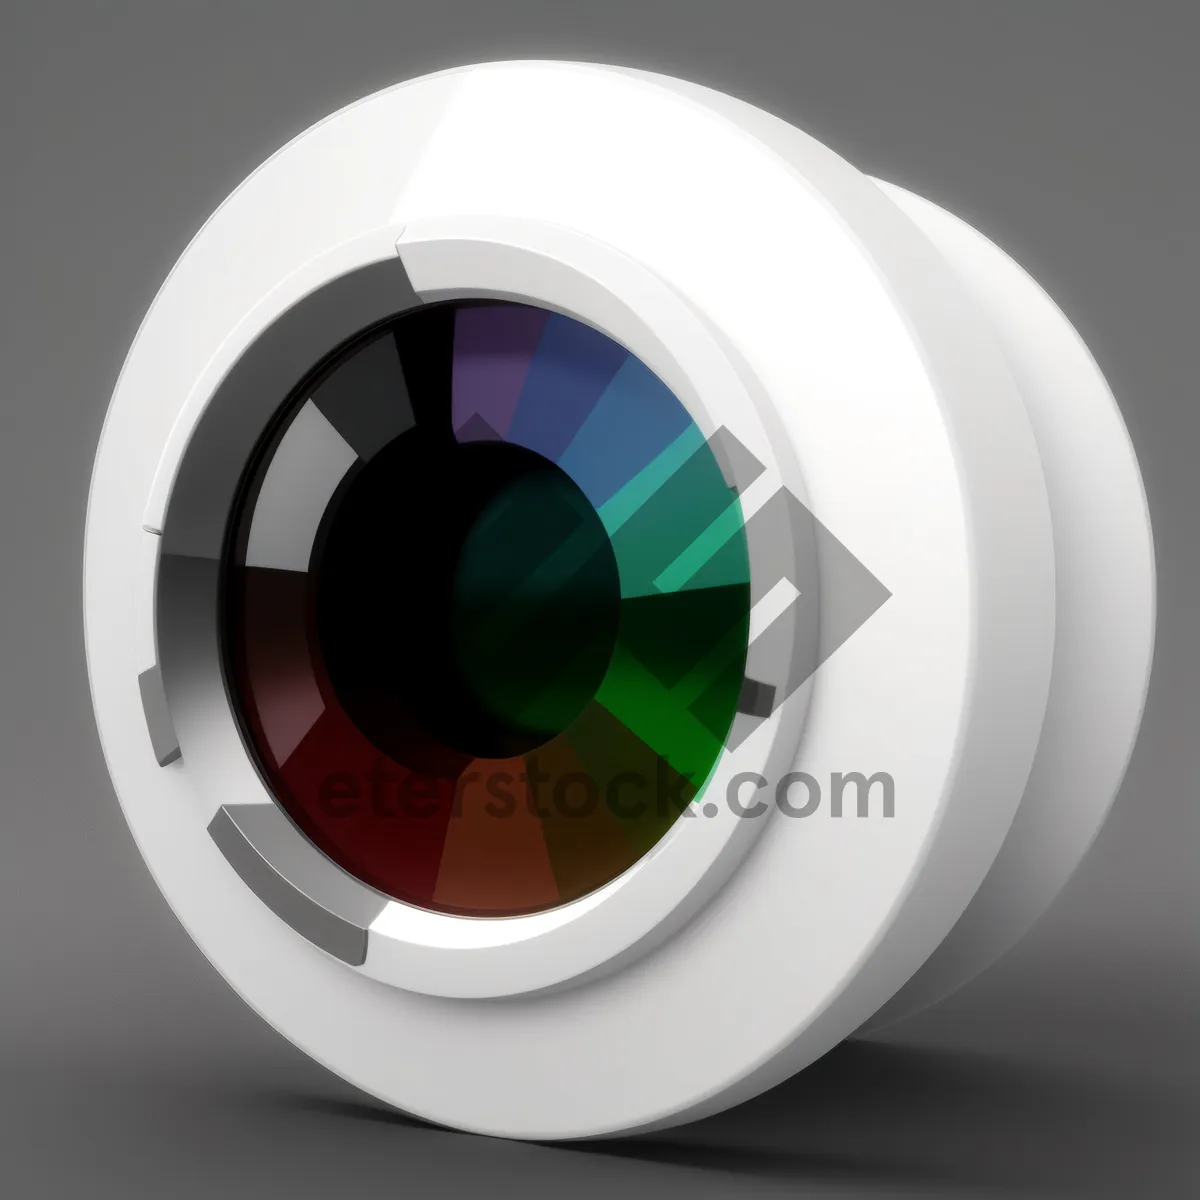 Picture of Shiny Metallic Button Icon with Glass Reflection